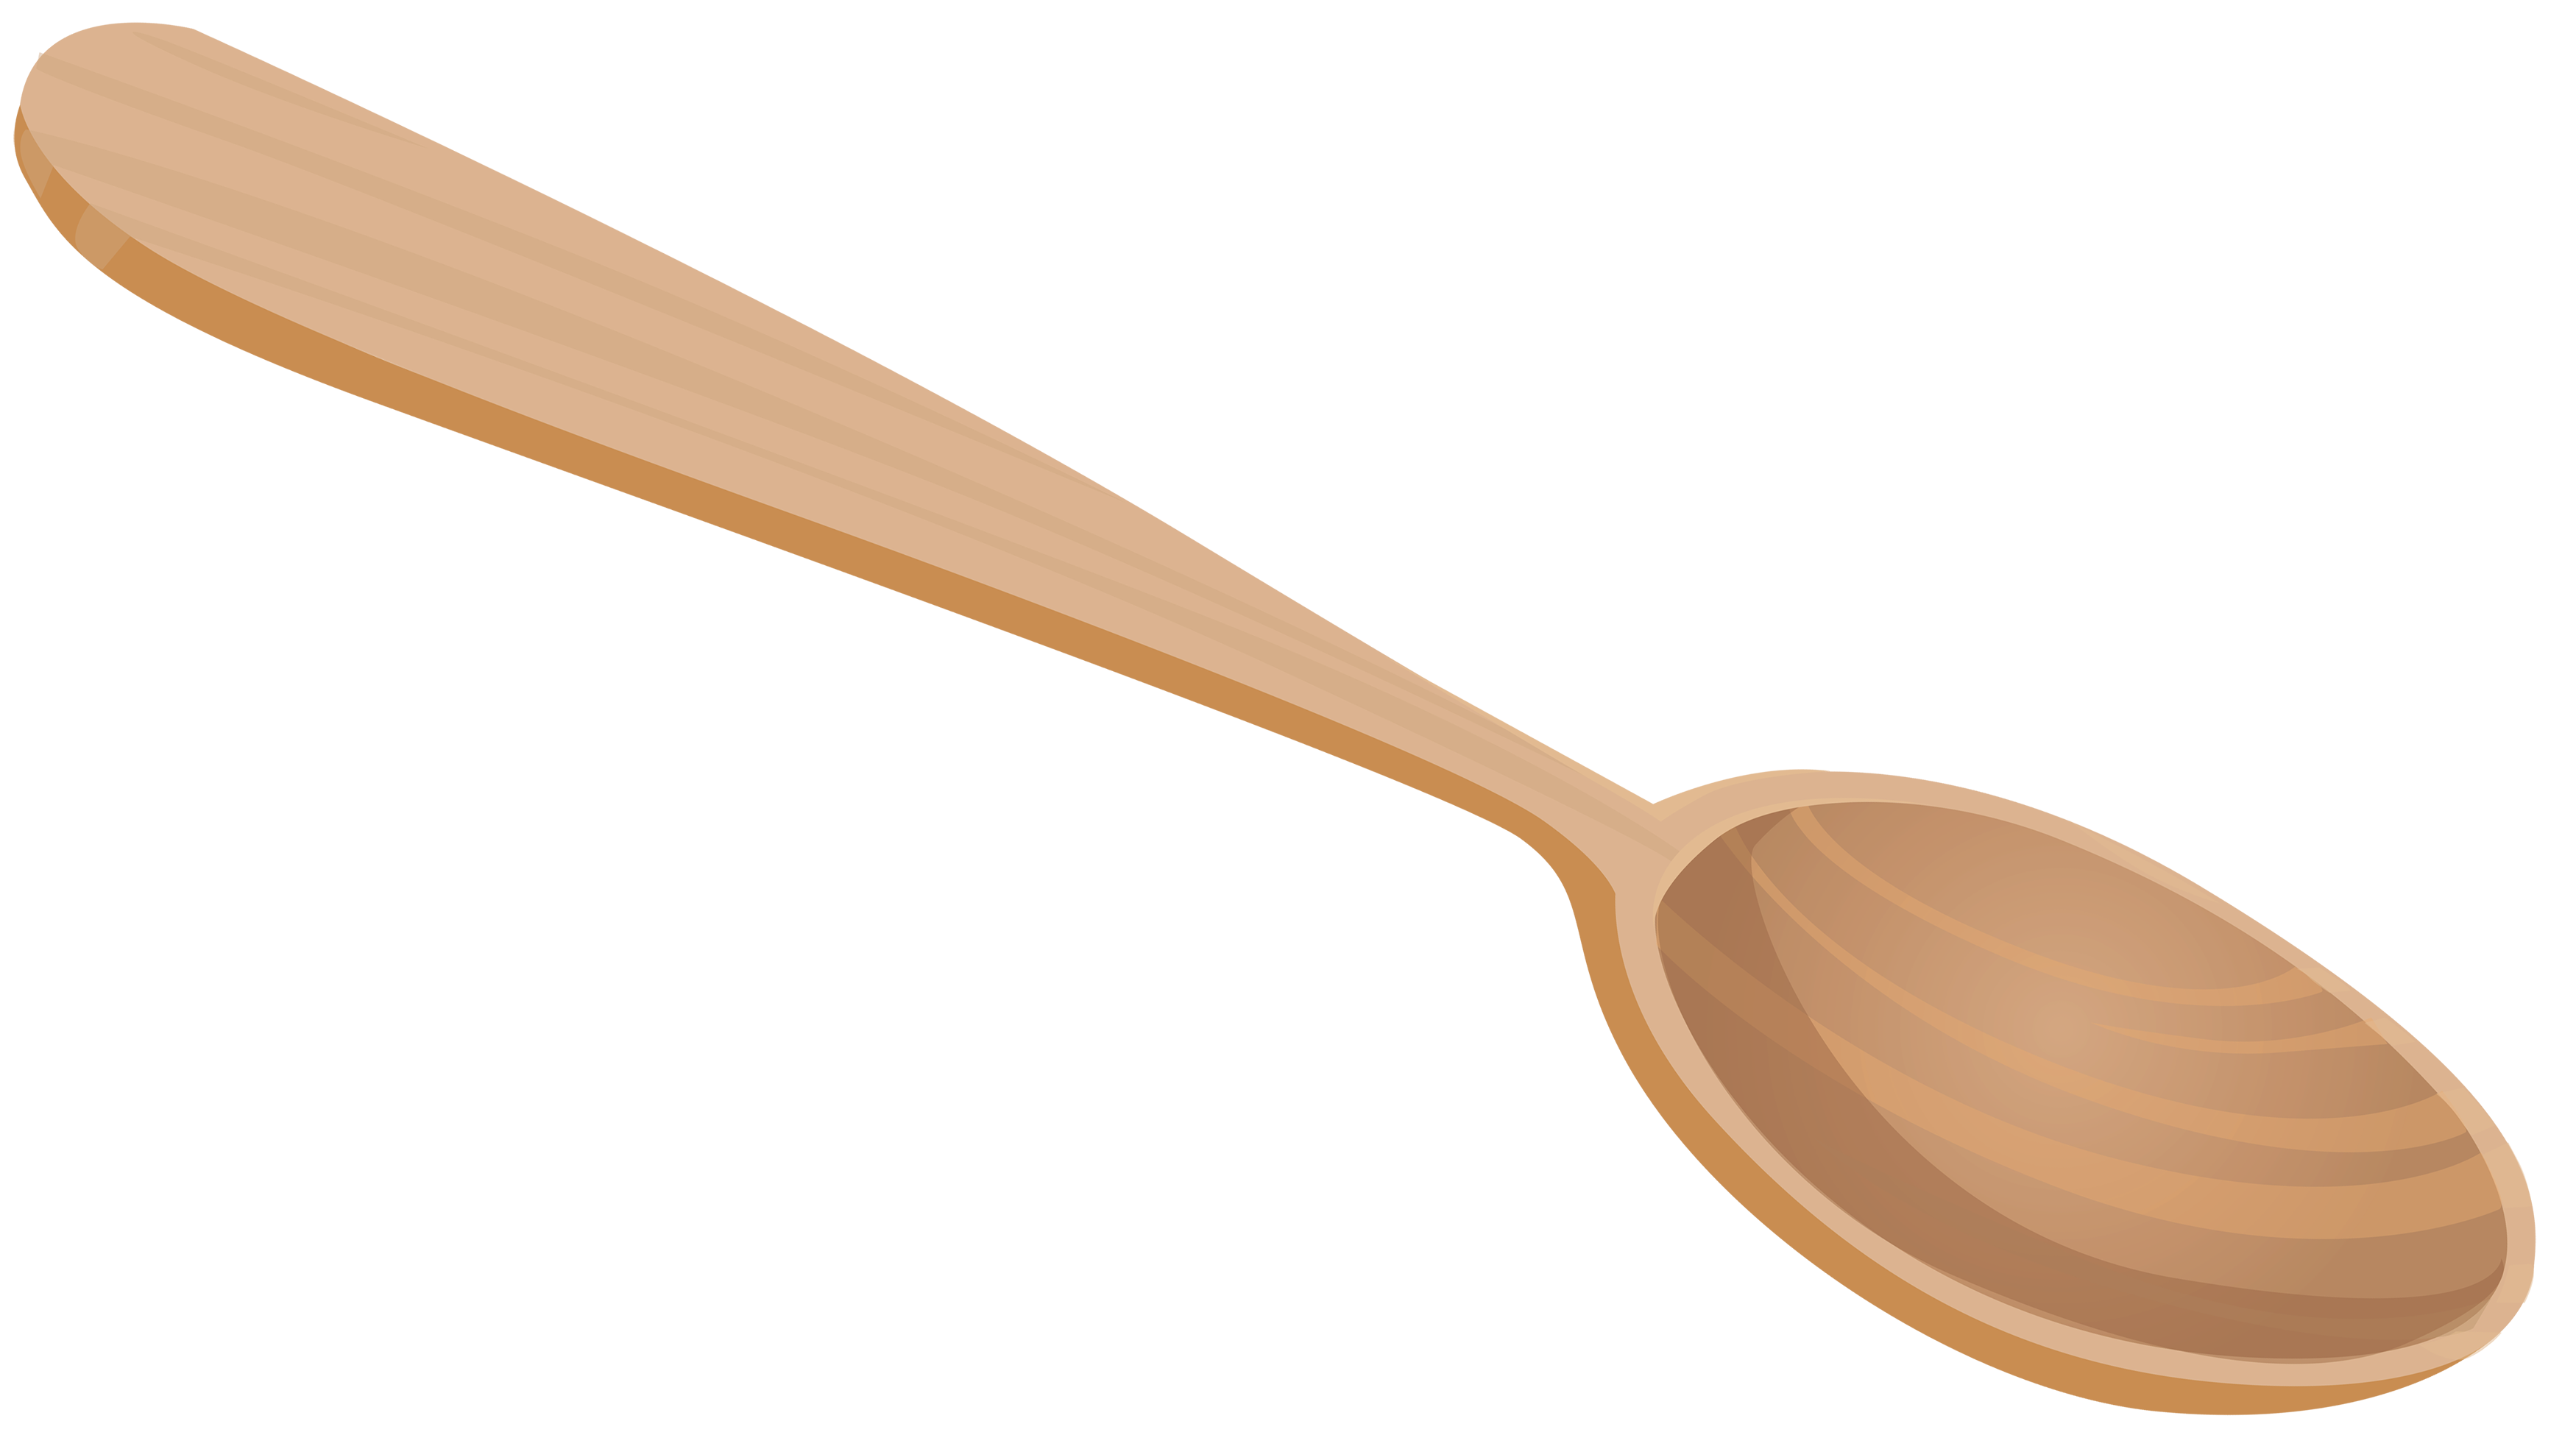 Spoon PNG image